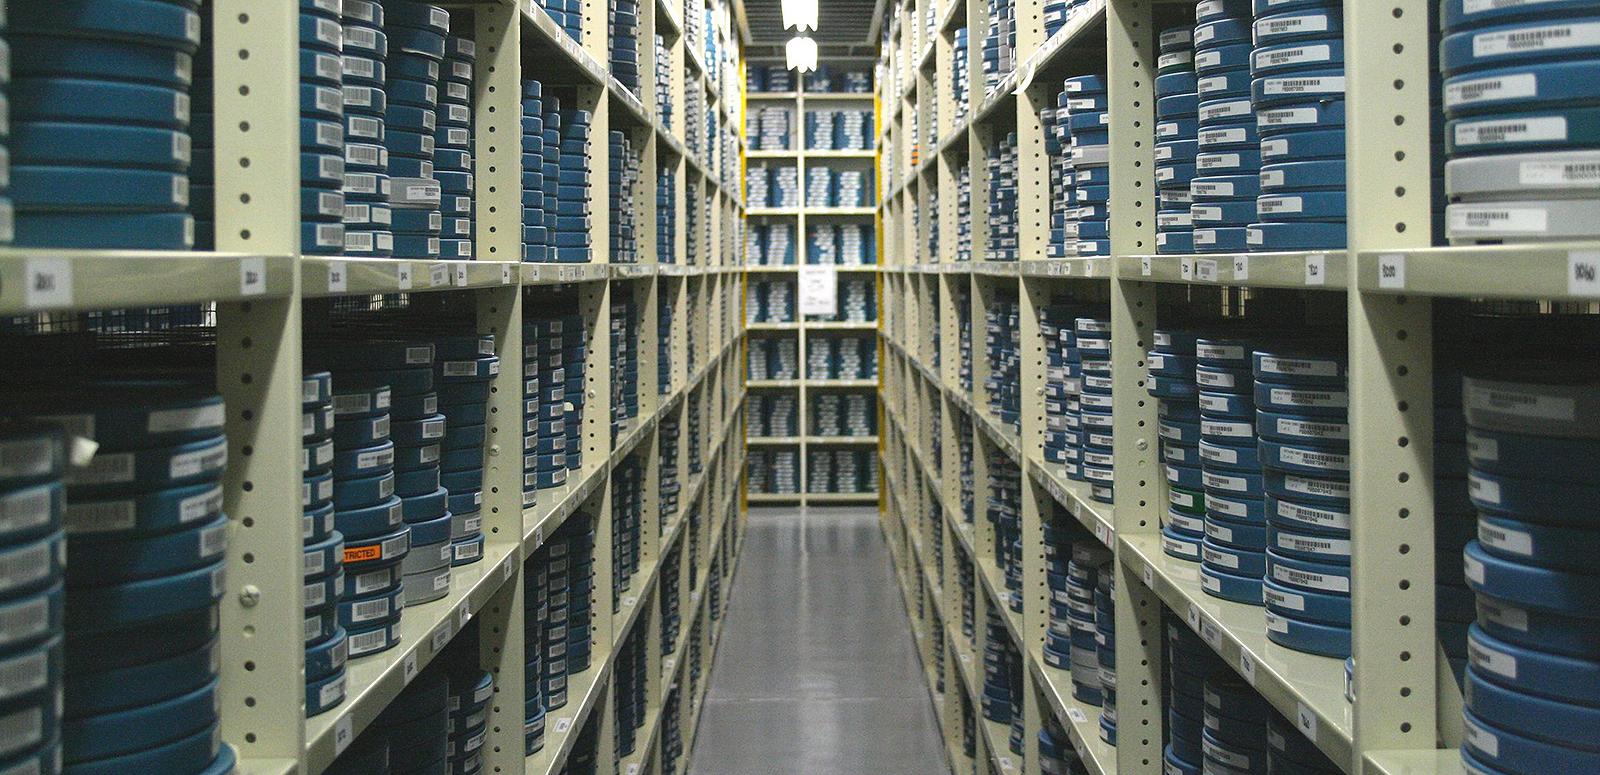 Shelves filled with stacks of film canisters in a vault at the NFSA